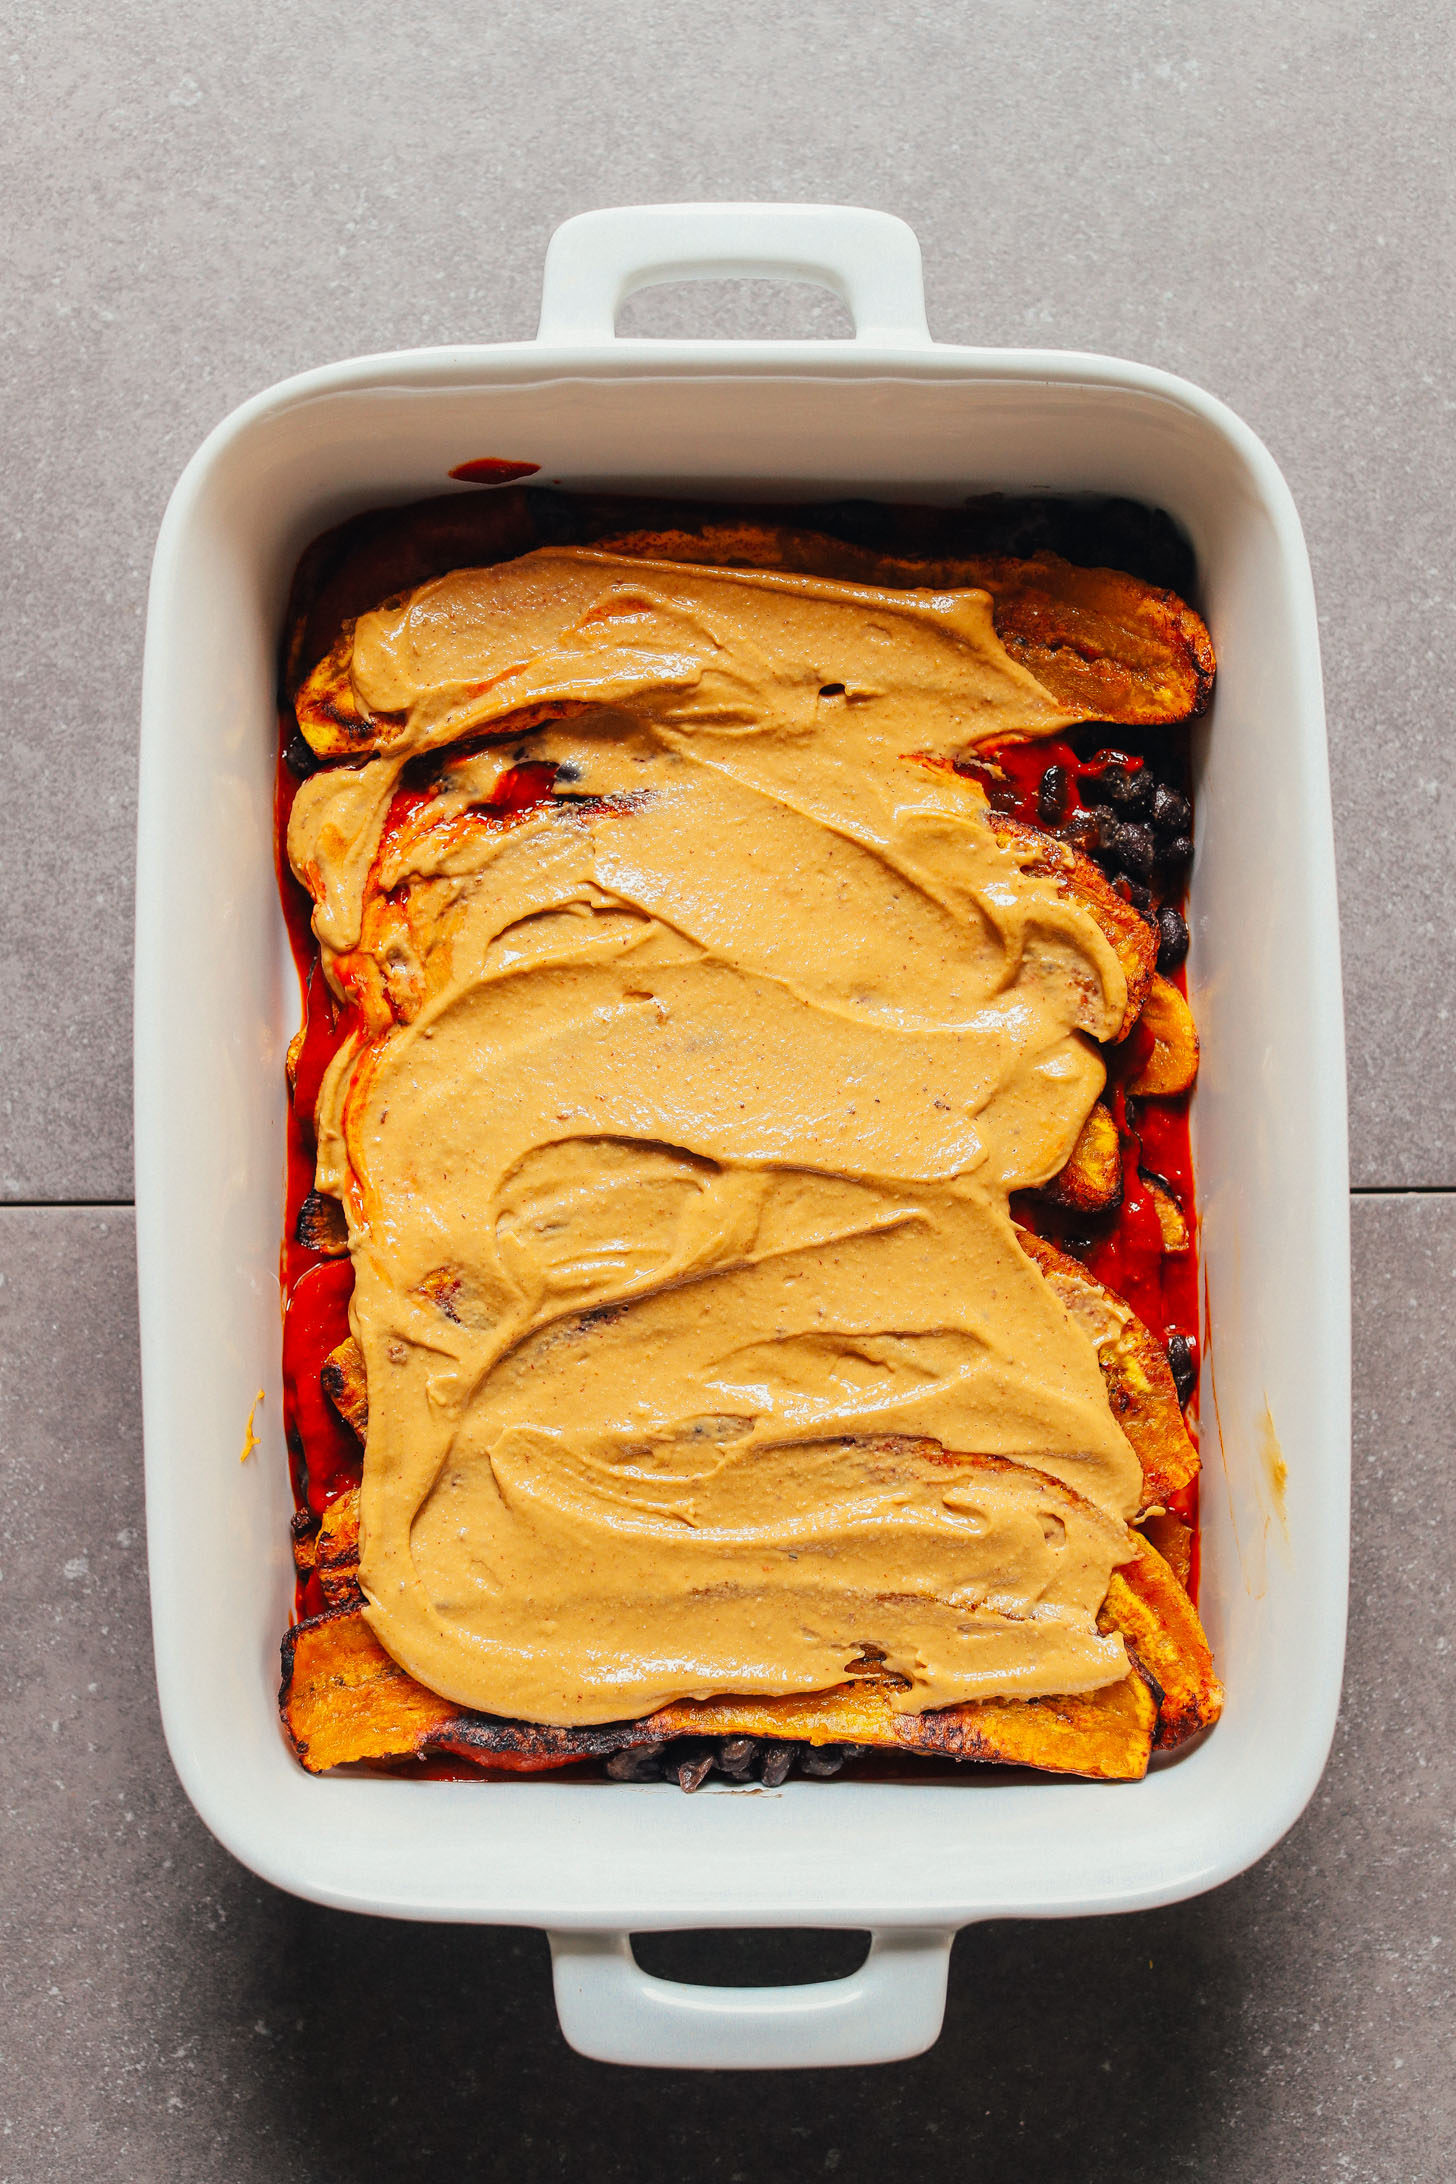 Showing a layer of Vegan Queso on our Plantain Black Bean Enchilada Bake